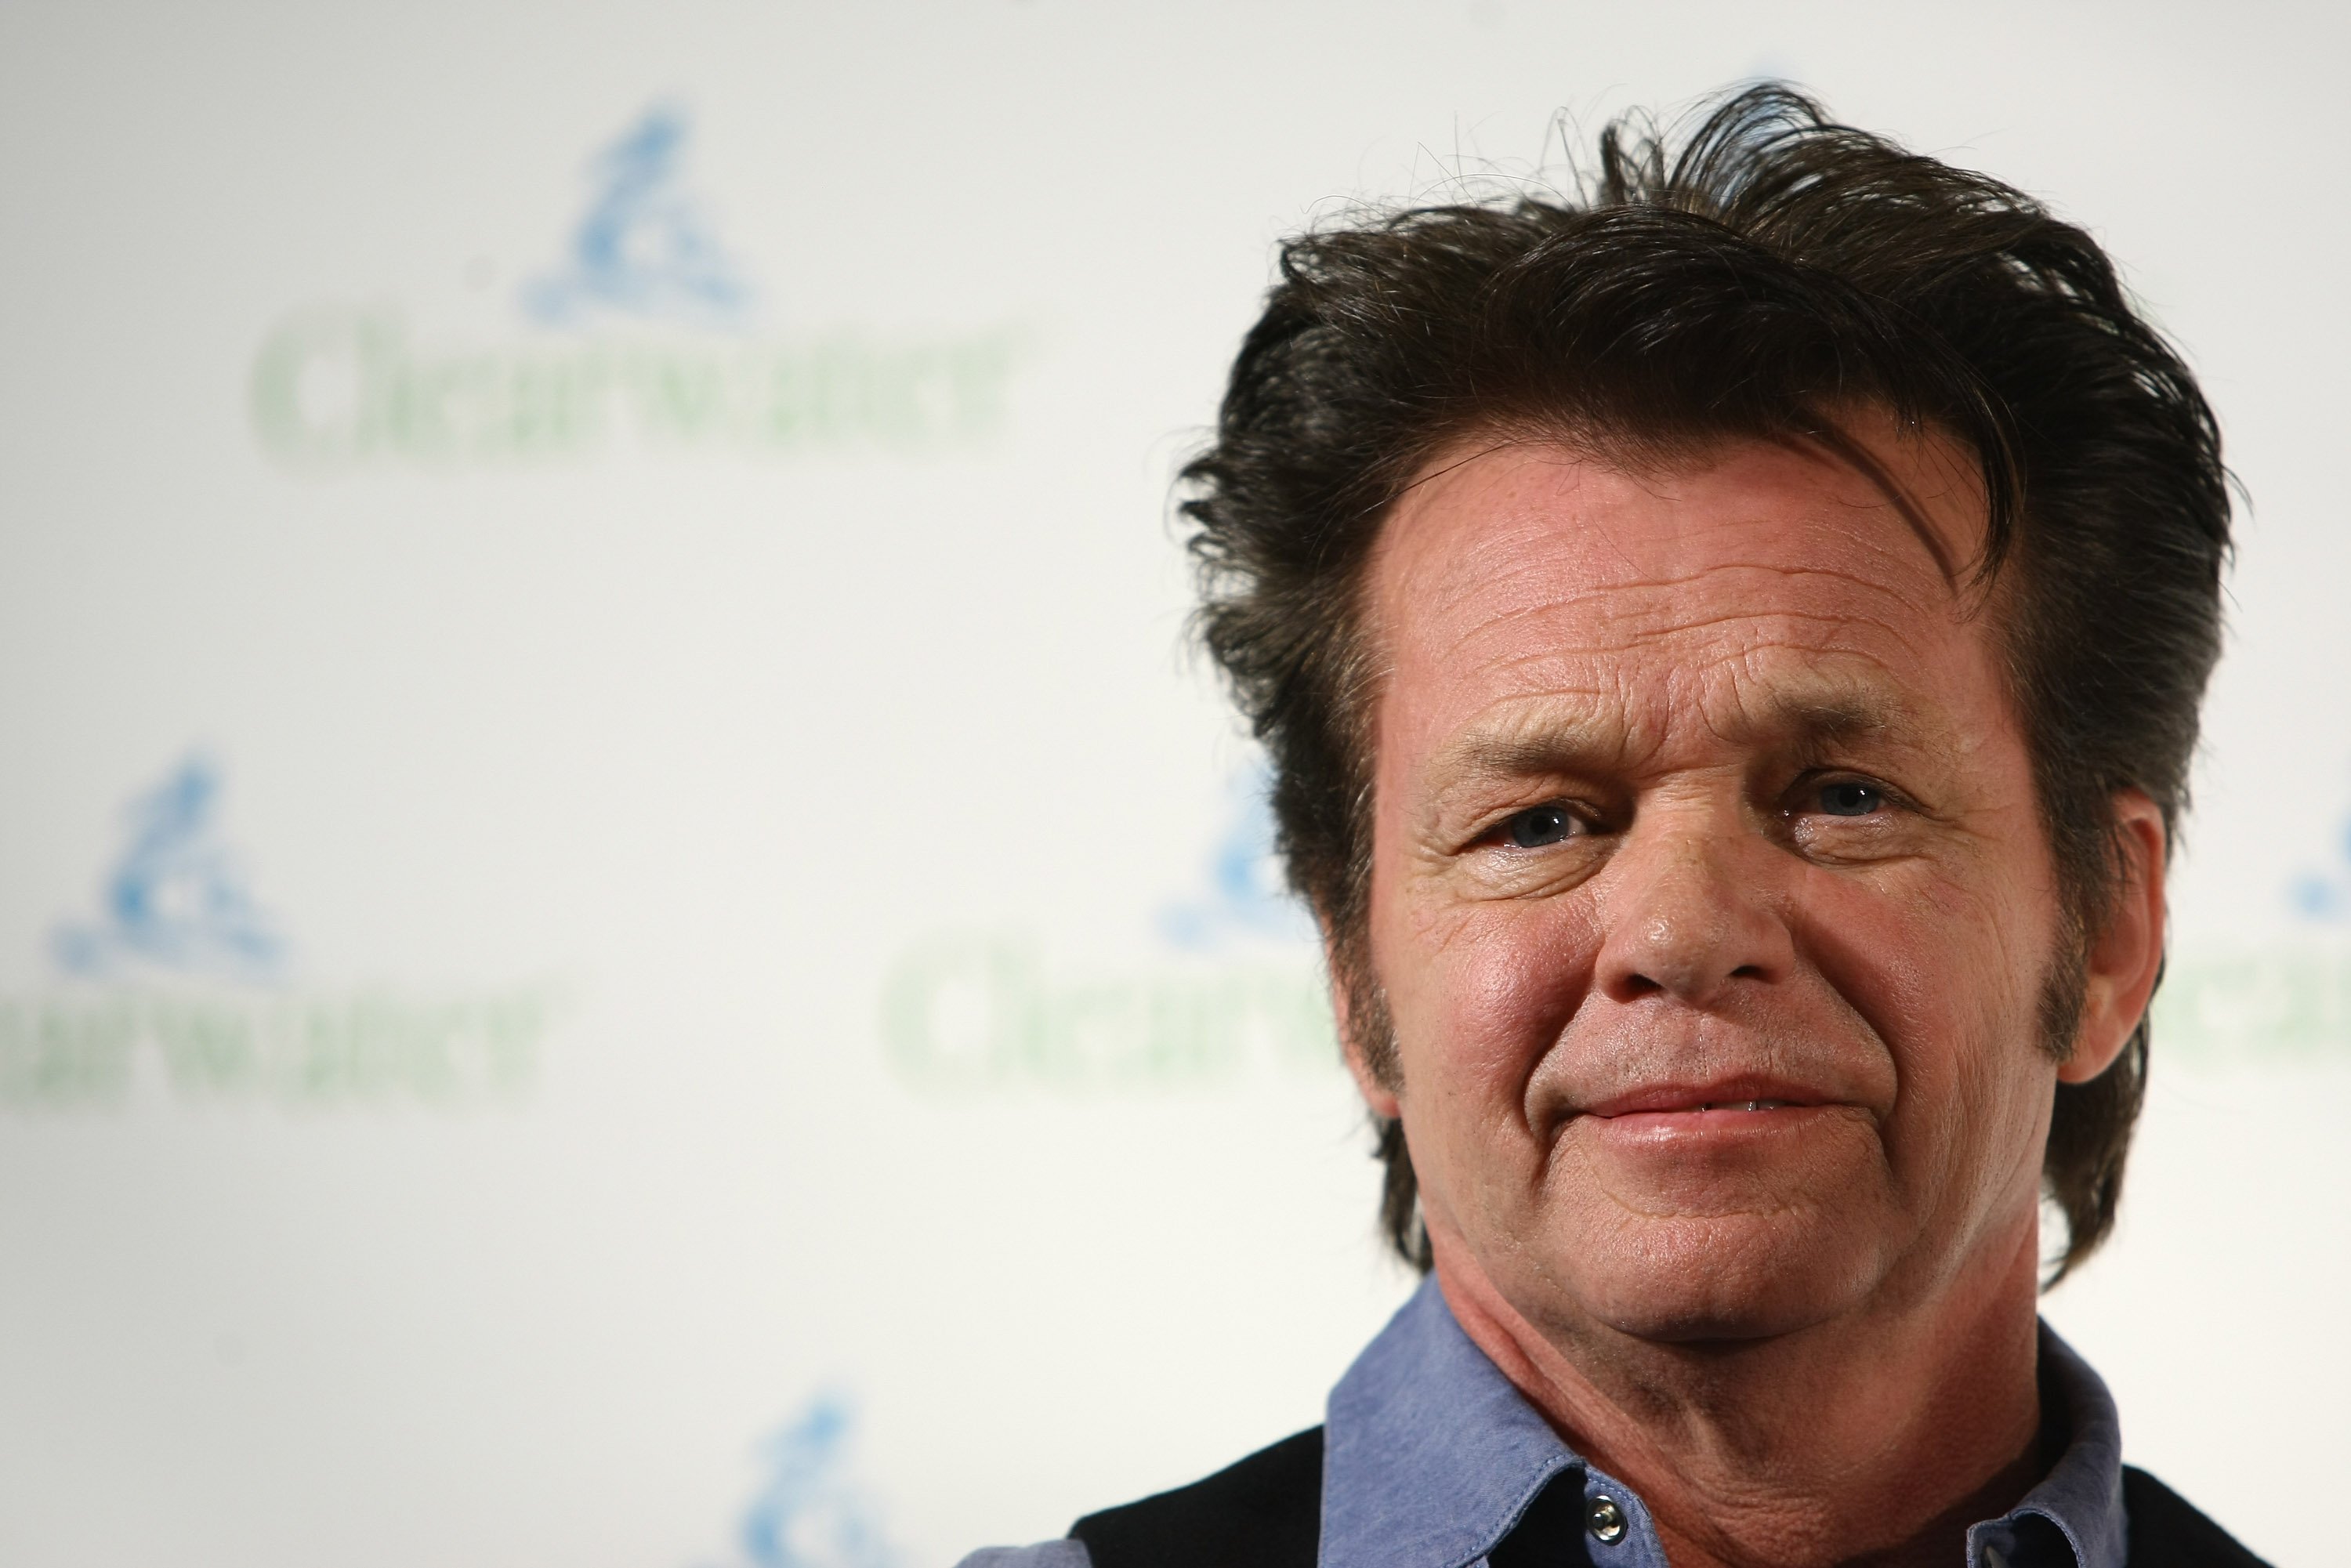 John Mellencamp attends the Clearwater Benefit Concert celebrating Pete Seeger's 90th Birthday. | Source: Getty Images